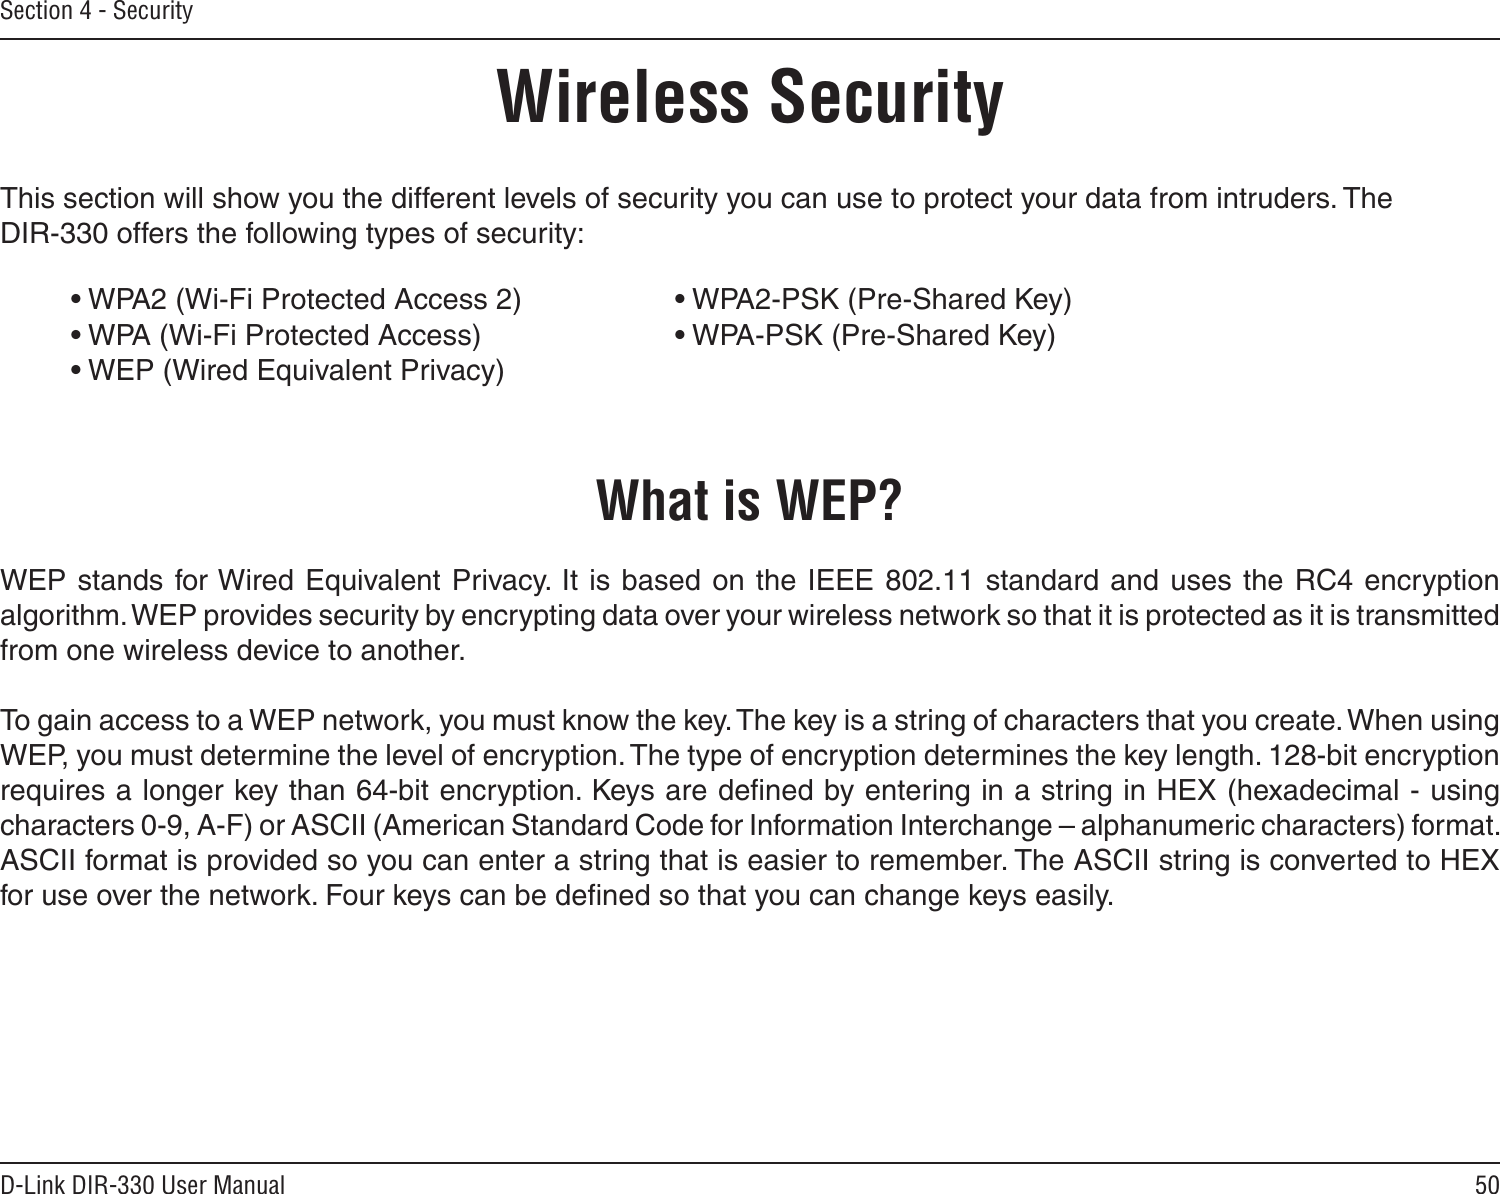 50D-Link DIR-330 User ManualSection 4 - SecurityWireless SecurityThis section will show you the different levels of security you can use to protect your data from intruders. The DIR-330 offers the following types of security:• WPA2 (Wi-Fi Protected Access 2)     • WPA2-PSK (Pre-Shared Key)• WPA (Wi-Fi Protected Access)      • WPA-PSK (Pre-Shared Key)• WEP (Wired Equivalent Privacy)What is WEP?WEP stands for Wired Equivalent Privacy.  It is based on the IEEE 802.11 standard and  uses the  RC4 encryption algorithm. WEP provides security by encrypting data over your wireless network so that it is protected as it is transmitted from one wireless device to another.To gain access to a WEP network, you must know the key. The key is a string of characters that you create. When using WEP, you must determine the level of encryption. The type of encryption determines the key length. 128-bit encryption requires a longer key than 64-bit encryption. Keys are deﬁned by entering in a string in HEX (hexadecimal - using characters 0-9, A-F) or ASCII (American Standard Code for Information Interchange – alphanumeric characters) format. ASCII format is provided so you can enter a string that is easier to remember. The ASCII string is converted to HEX for use over the network. Four keys can be deﬁned so that you can change keys easily.